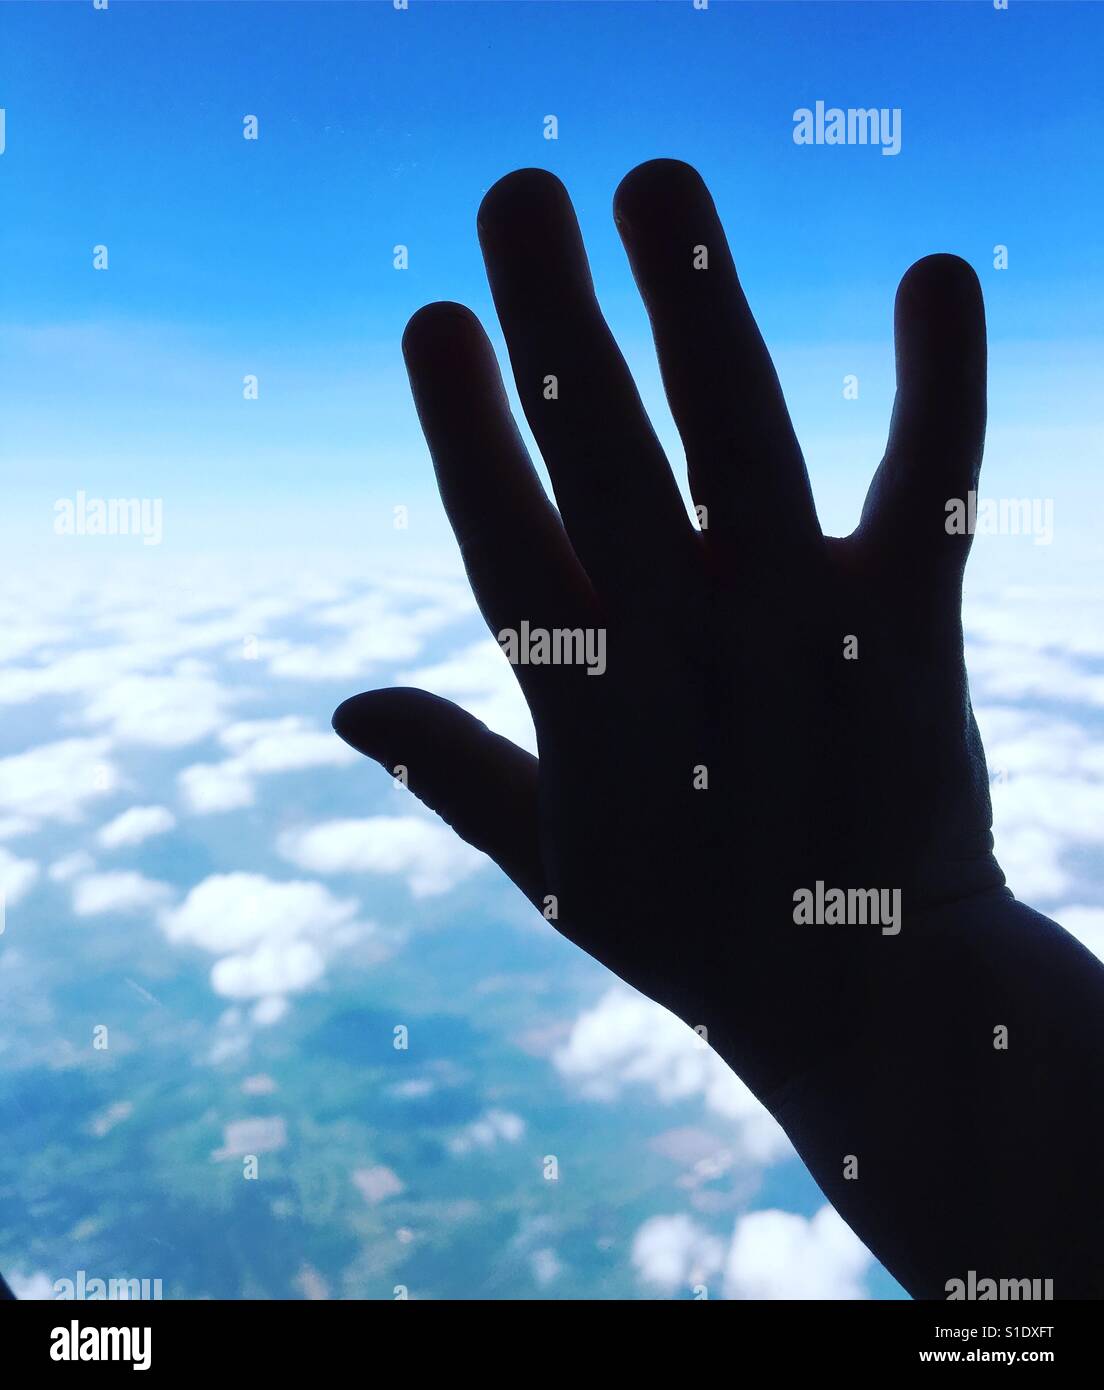 A child's hand up against the window of an airplane, silhouetted against a blue sky with white fluffy clouds Stock Photo